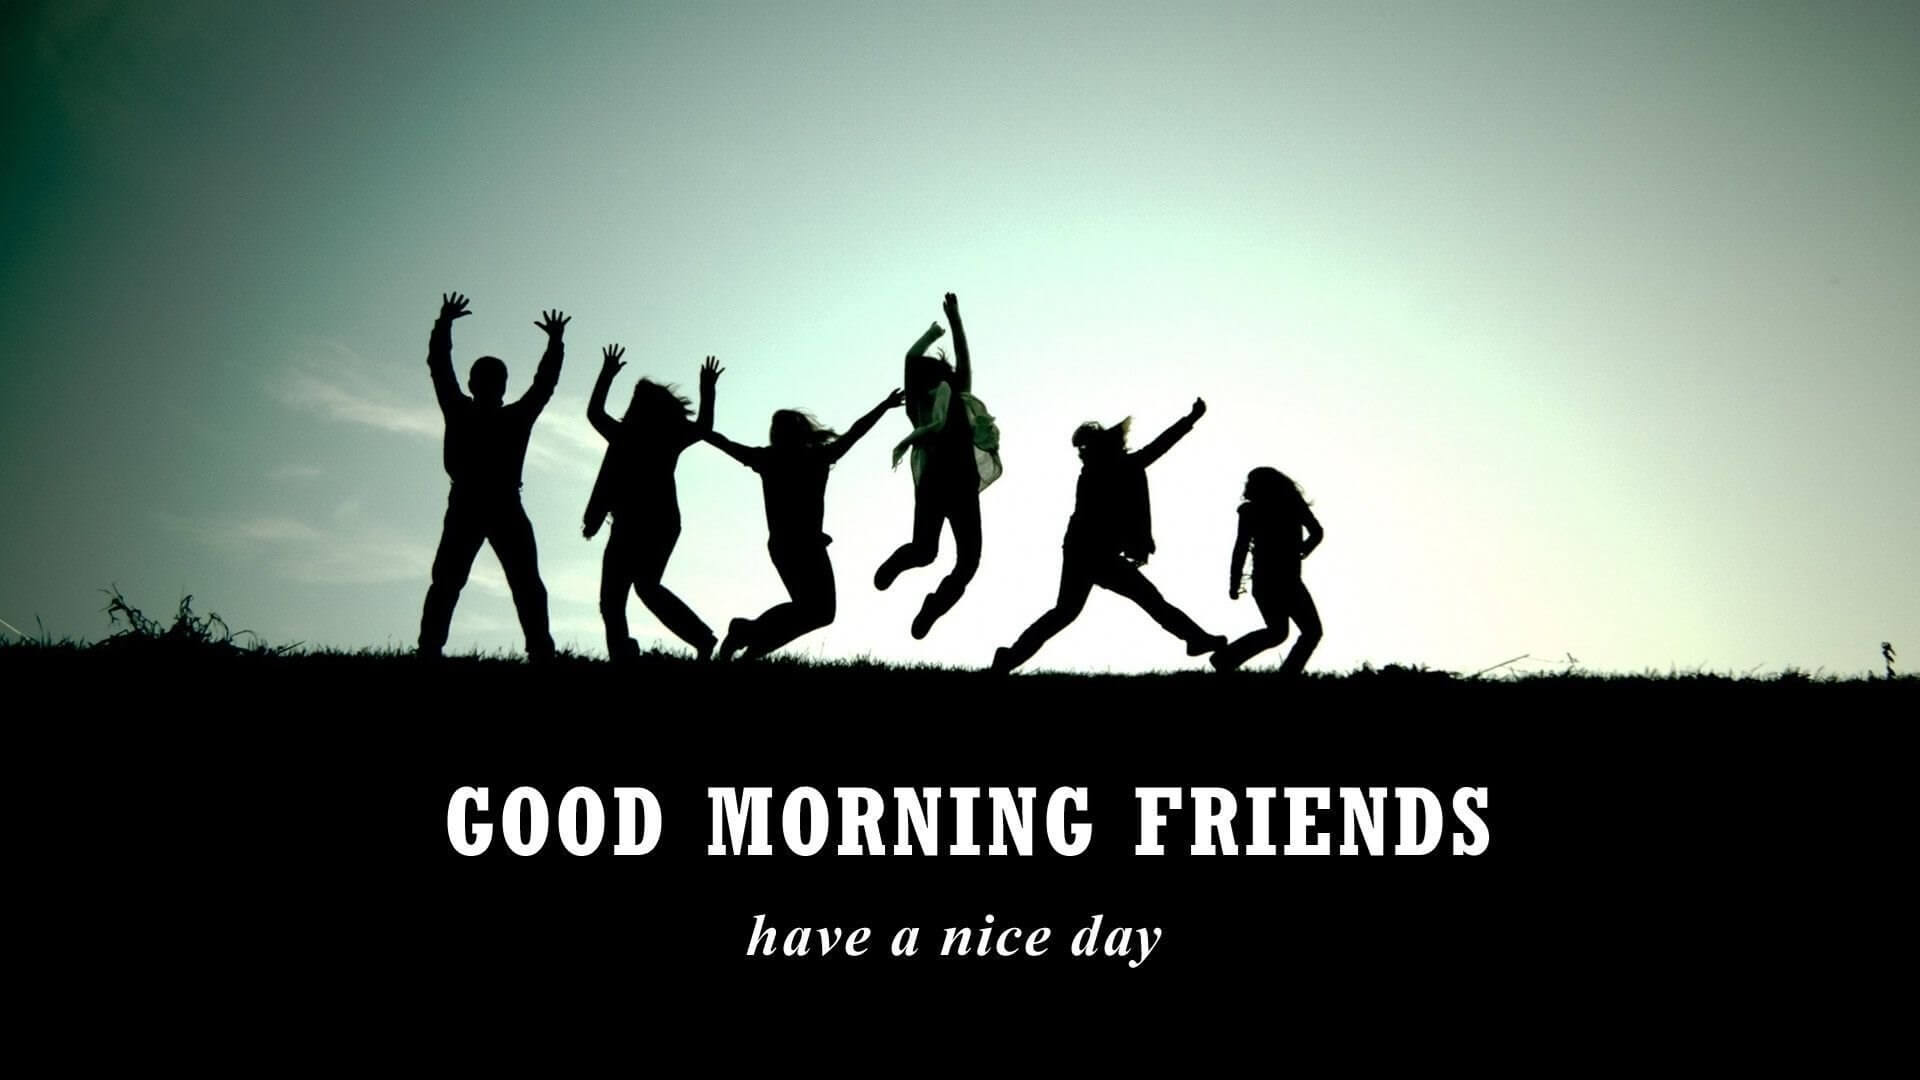 Good Morning Friends - Good Morning Have A Nice Day Wishes - HD Wallpaper 